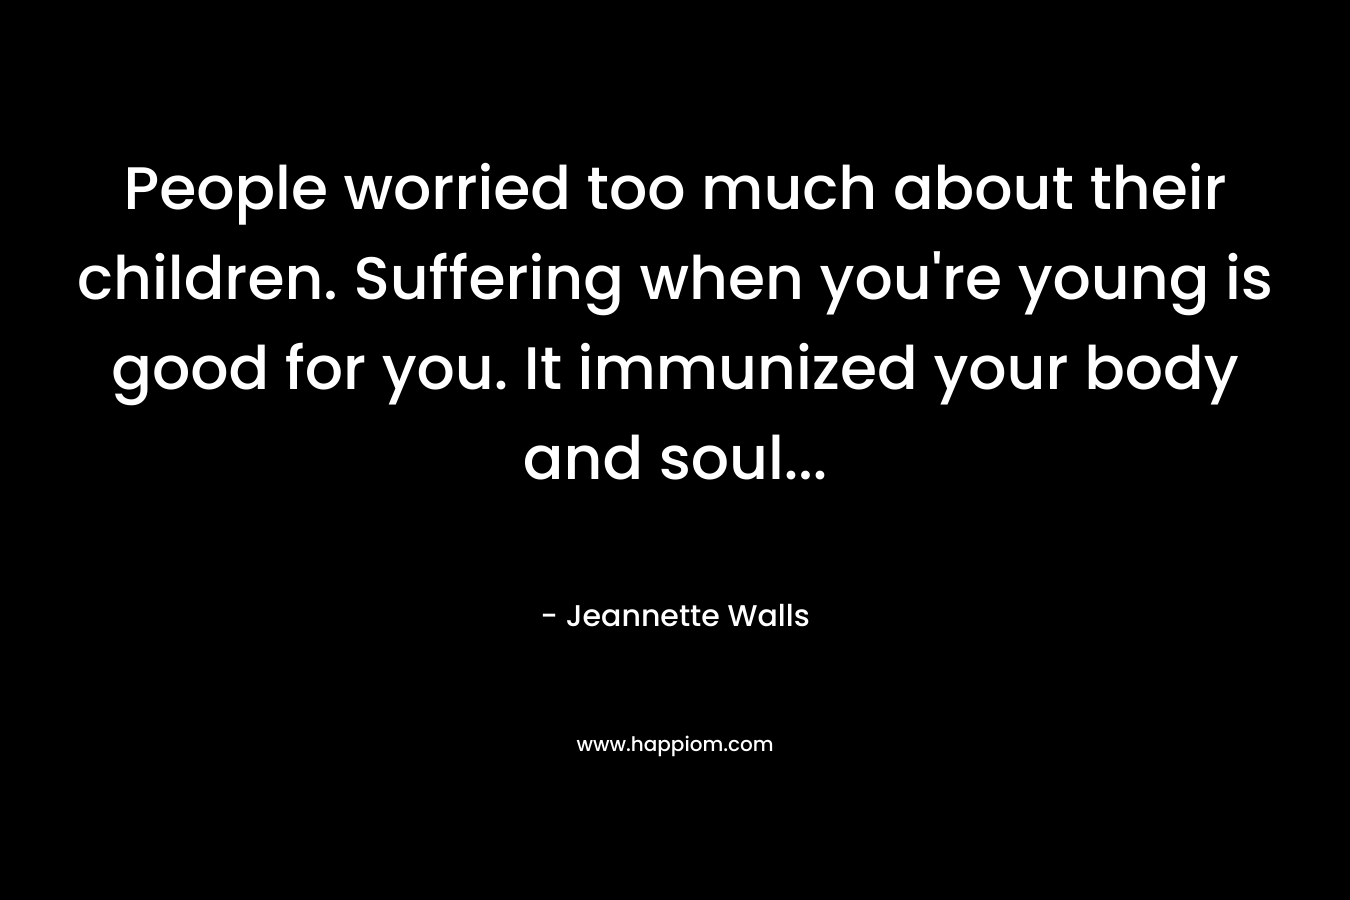 People worried too much about their children. Suffering when you’re young is good for you. It immunized your body and soul… – Jeannette Walls